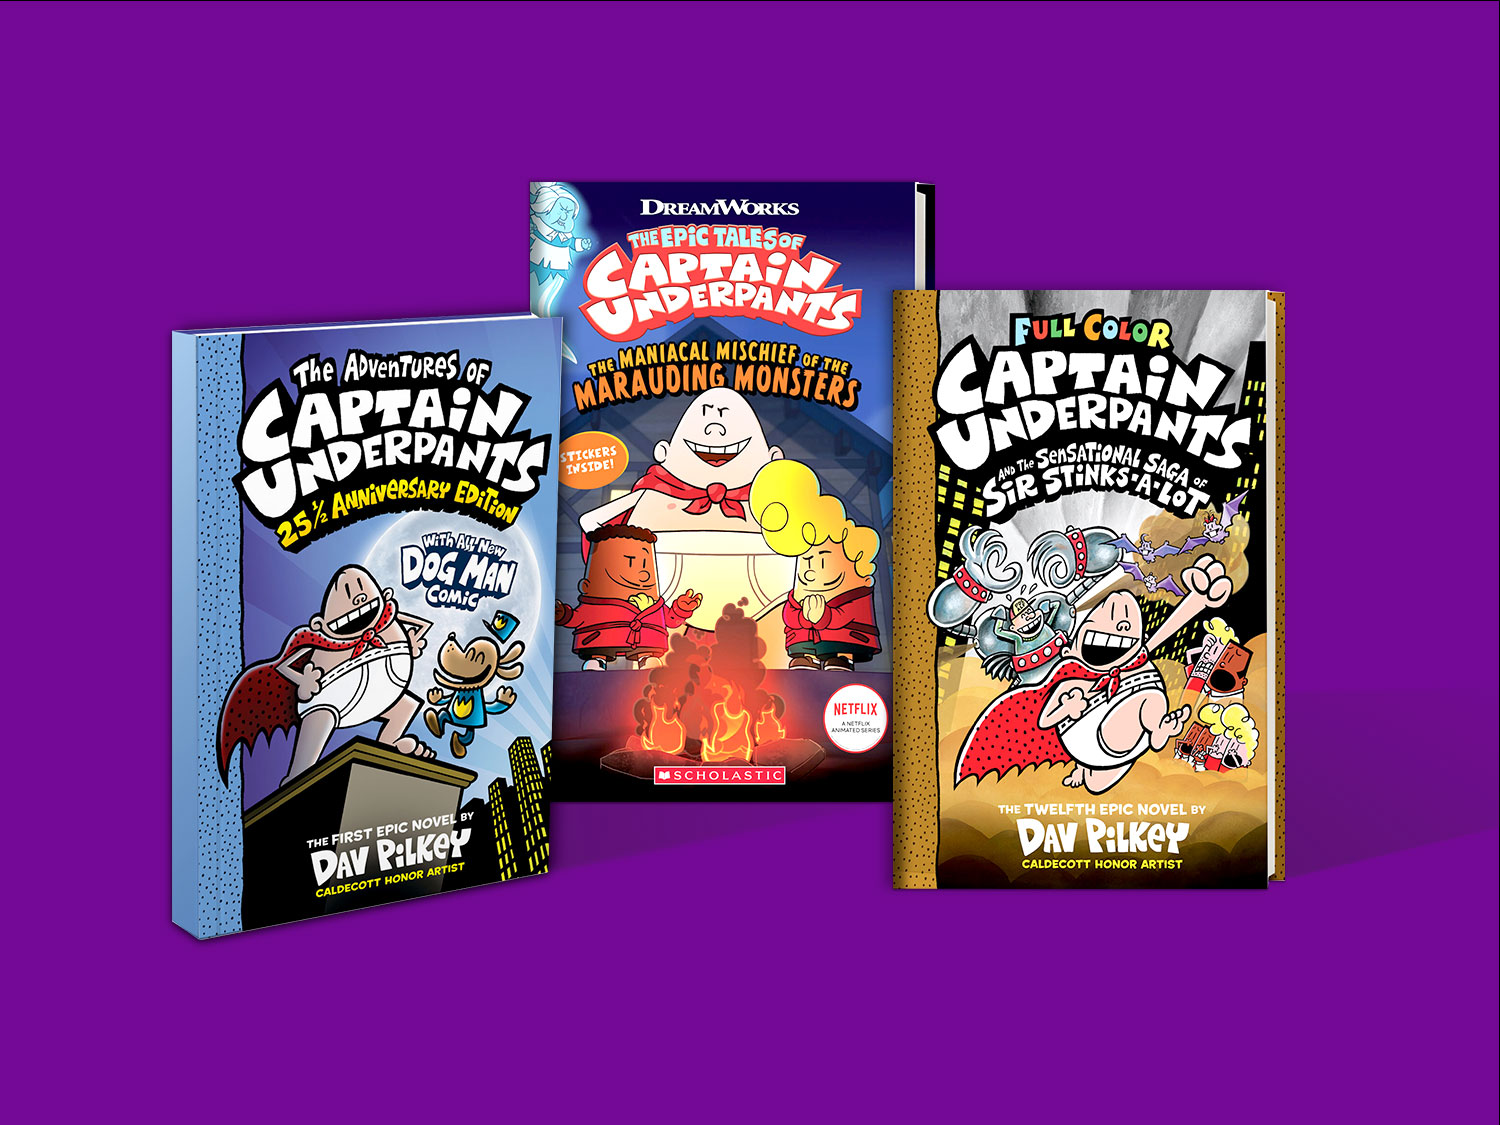 Captain Underpants' is elementary fun